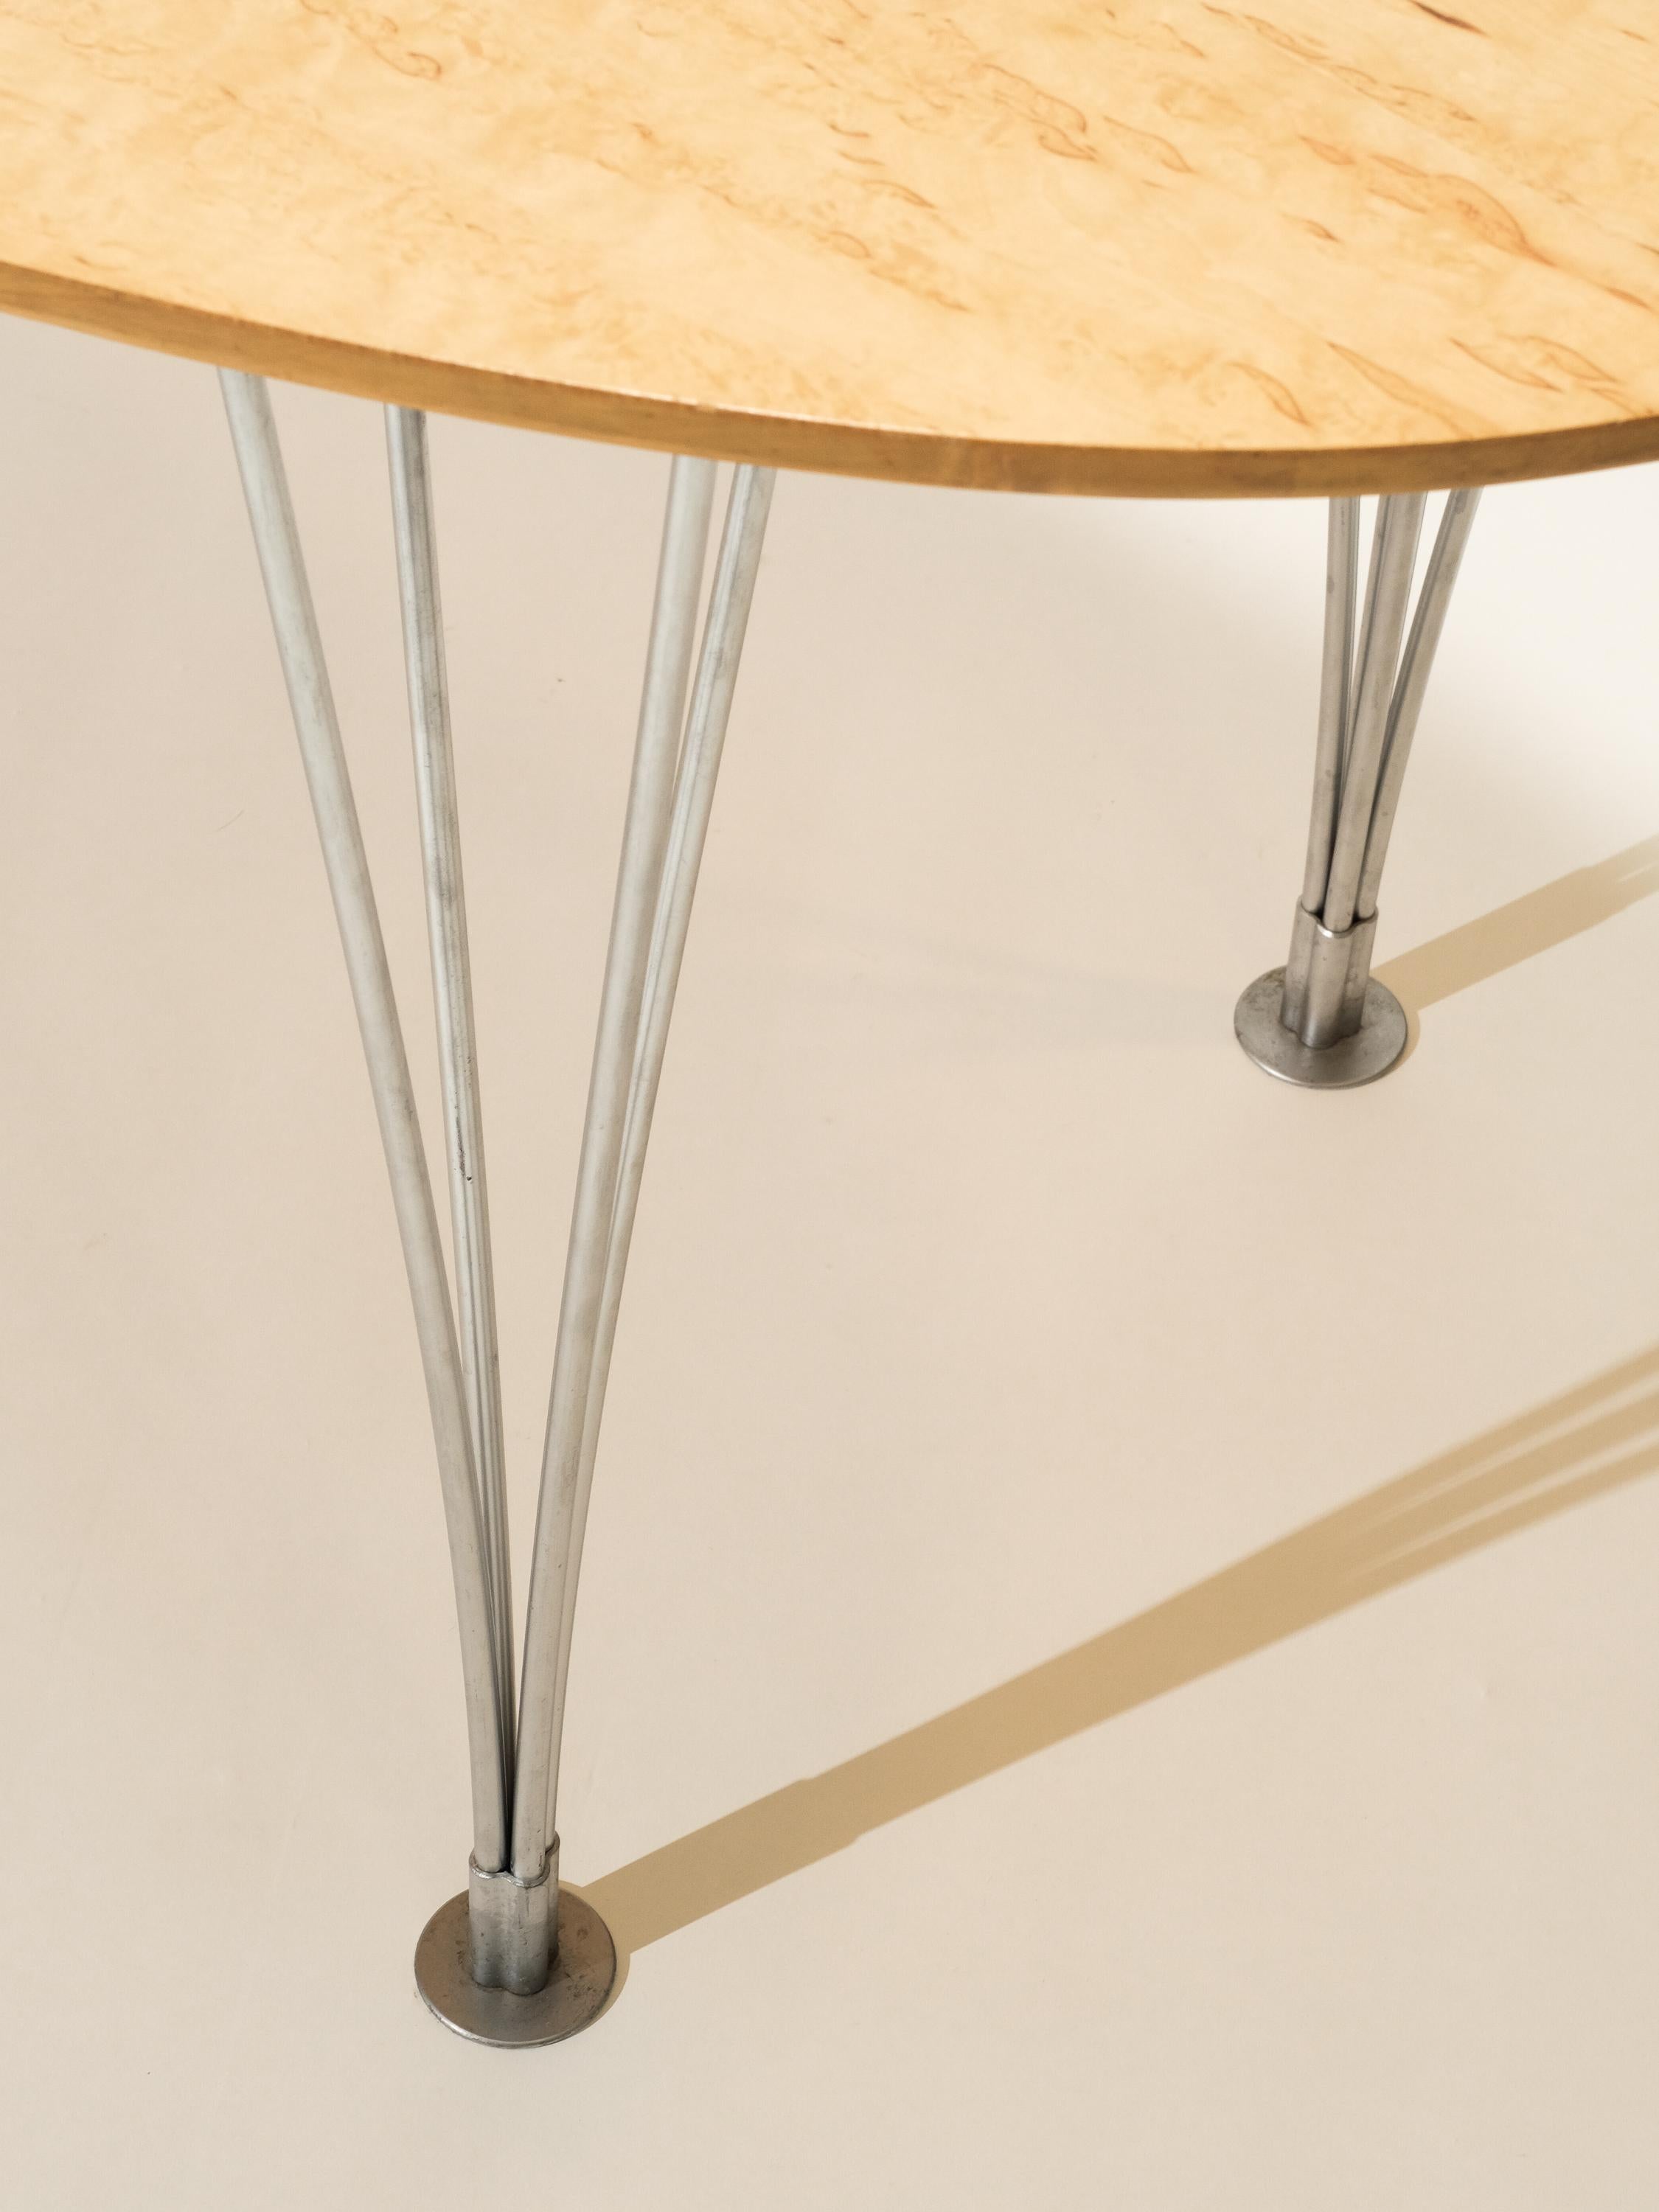 Late 20th Century Vintage Super Ellipse Dining Table by Bruno Mathsson in Masur Birch For Sale